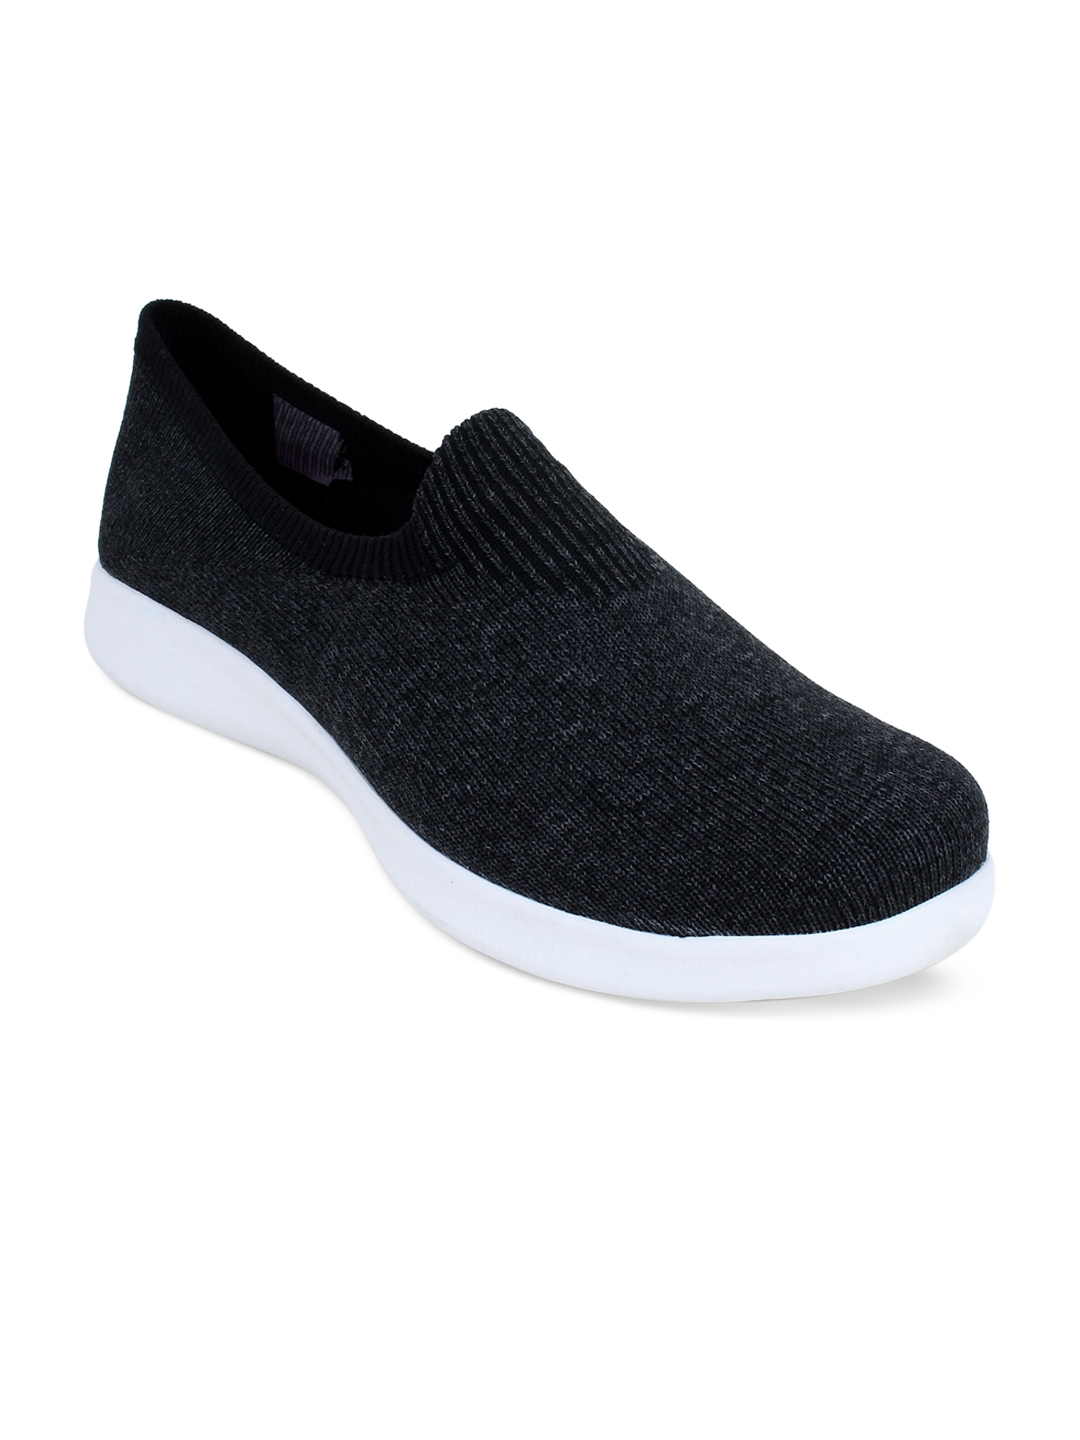 Buy Action Men Black Running Slip On Sports Shoes - Sports Shoes for ...